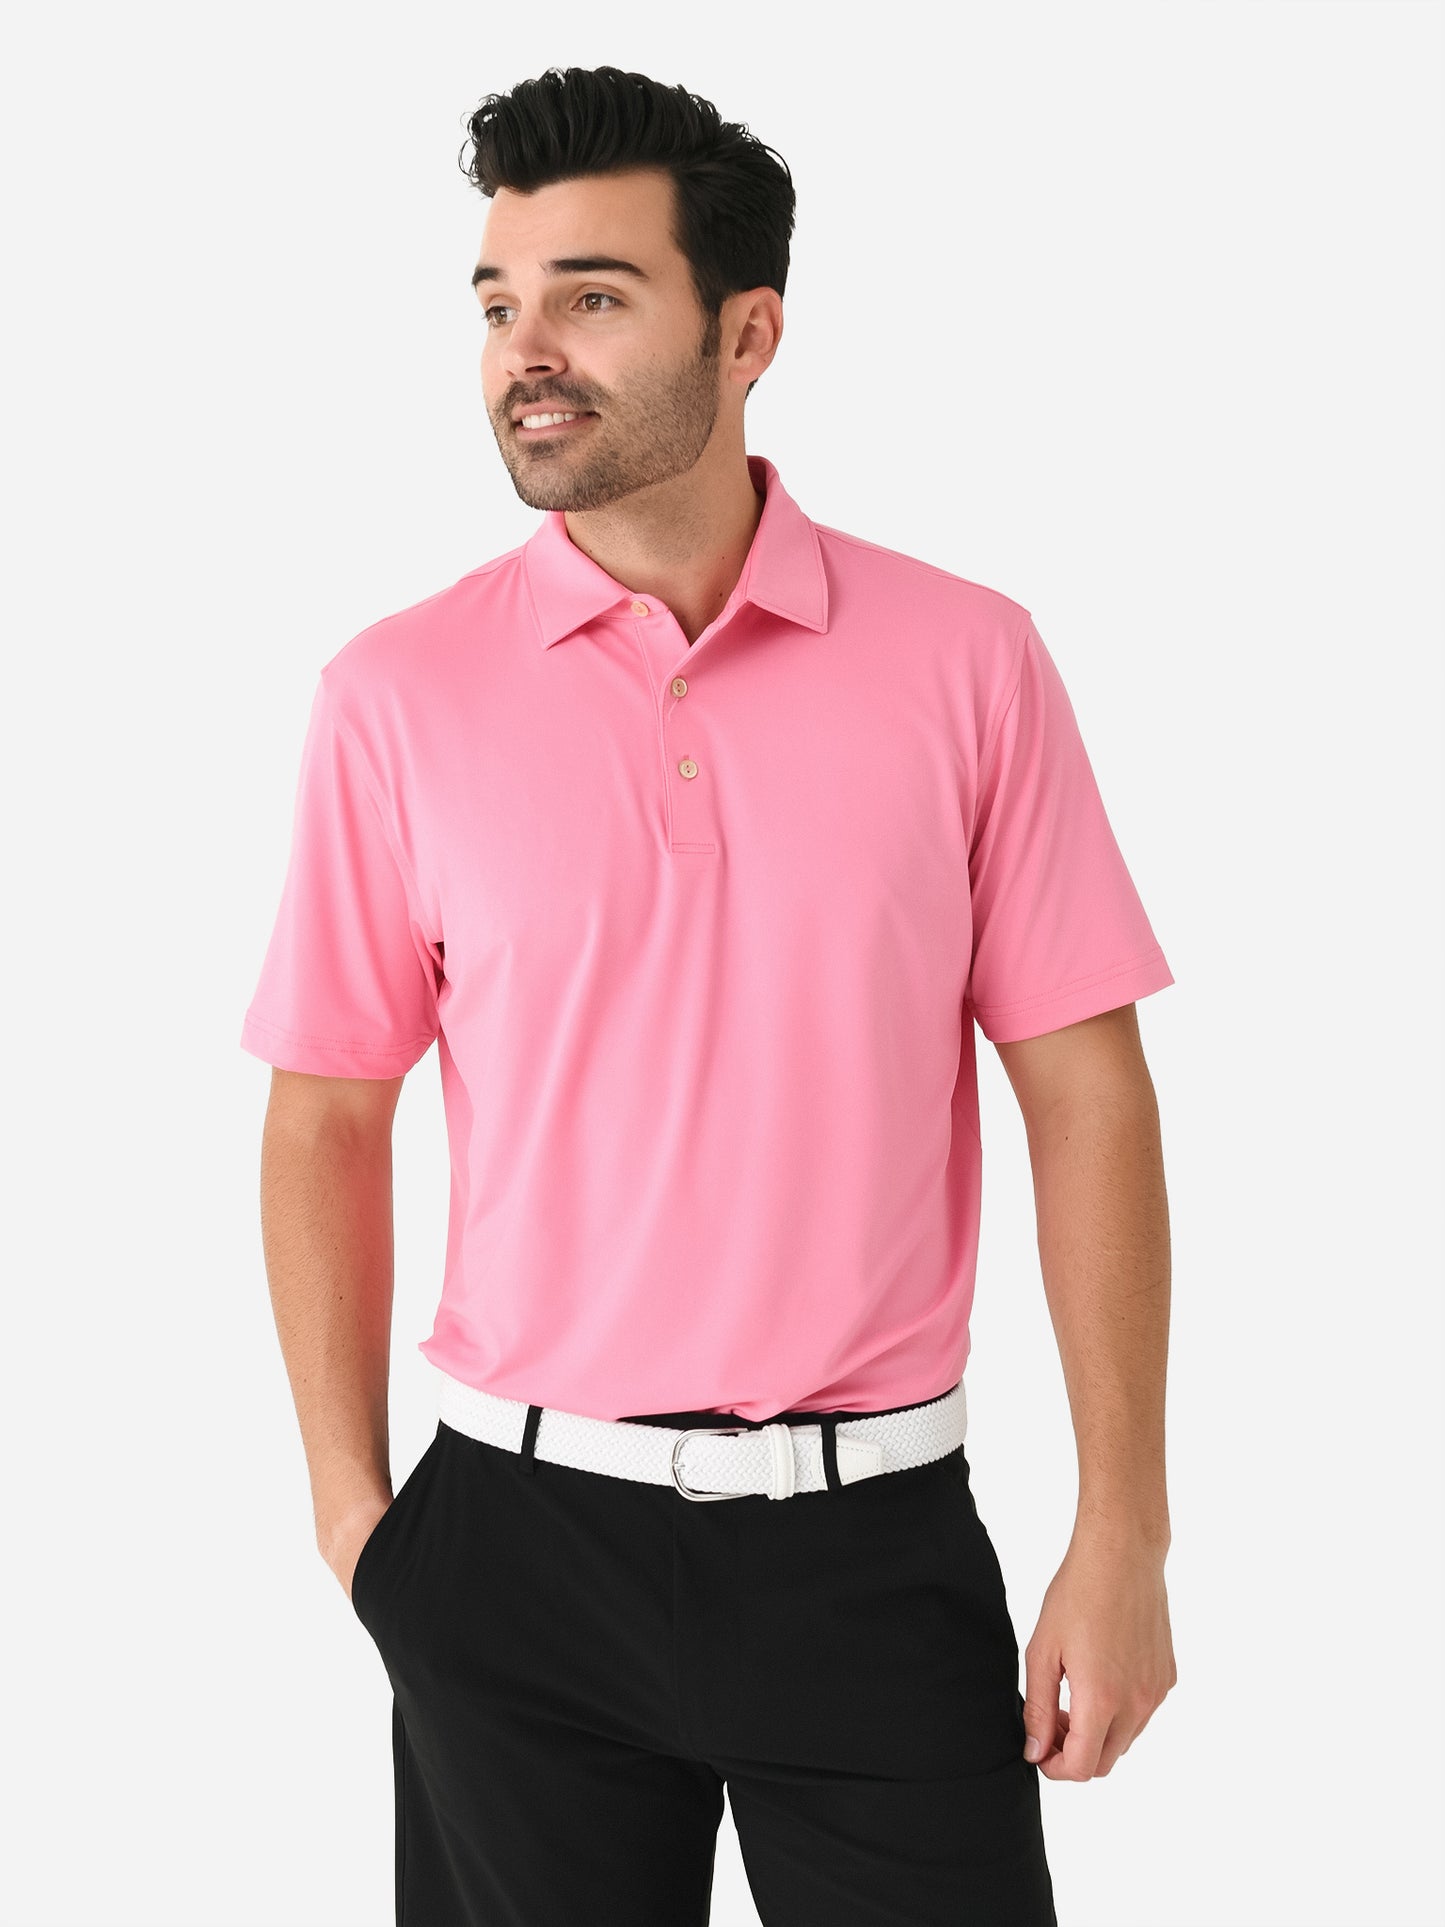 Peter Millar Crown Sport Men's Solid Performance Jersey Polo